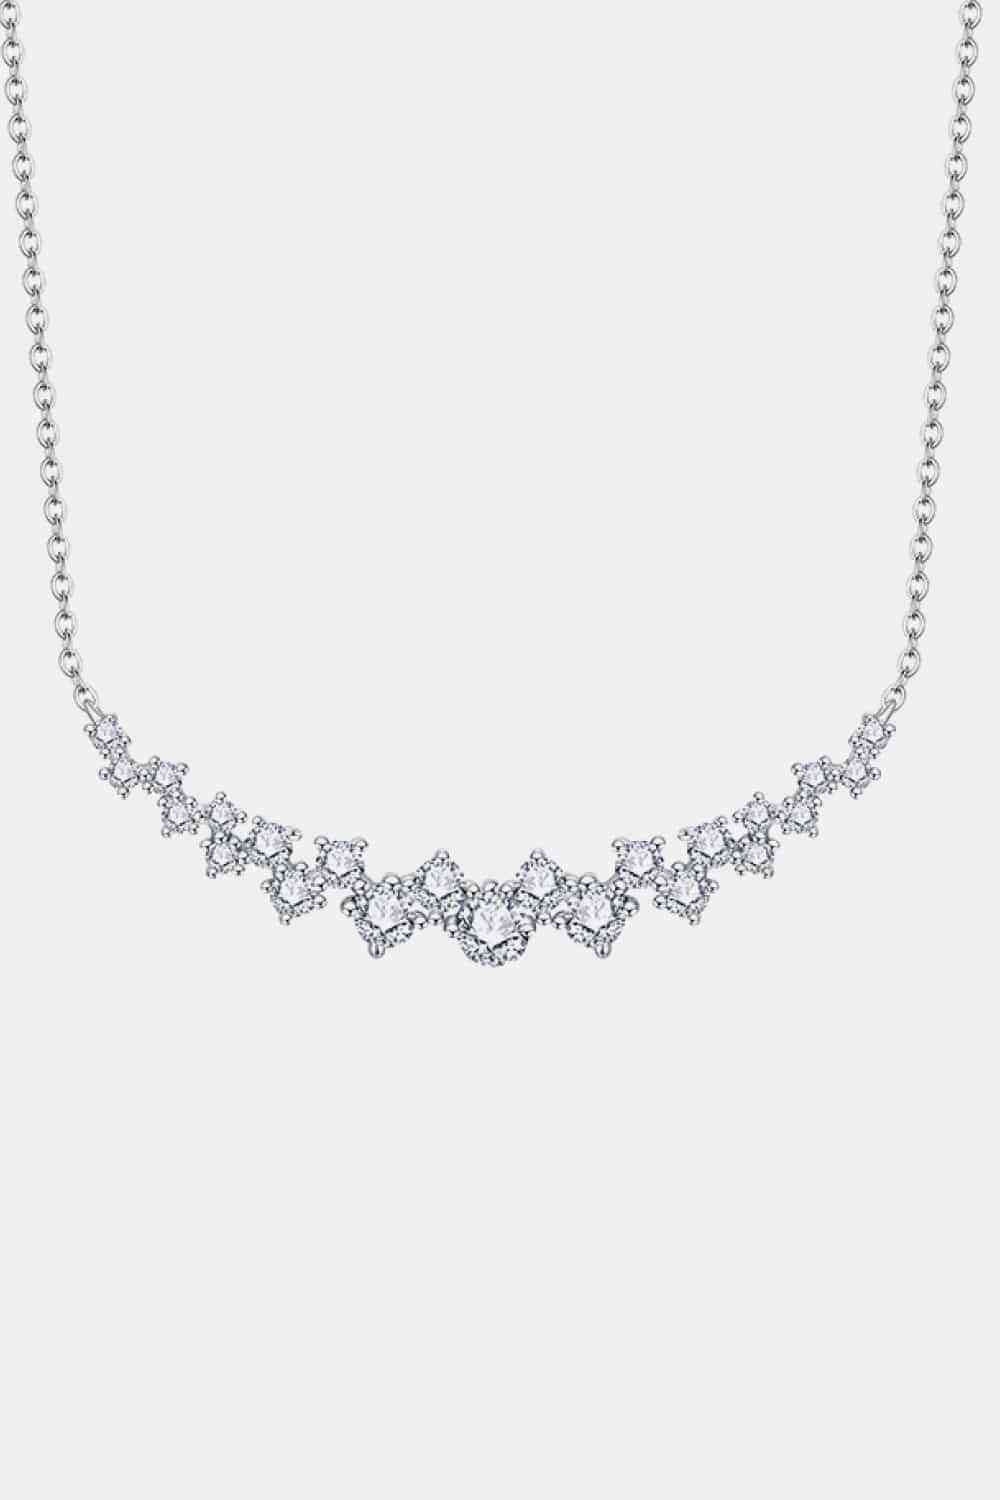 1.64 Carat Moissanite 925 Sterling Silver Necklace Silver One Size